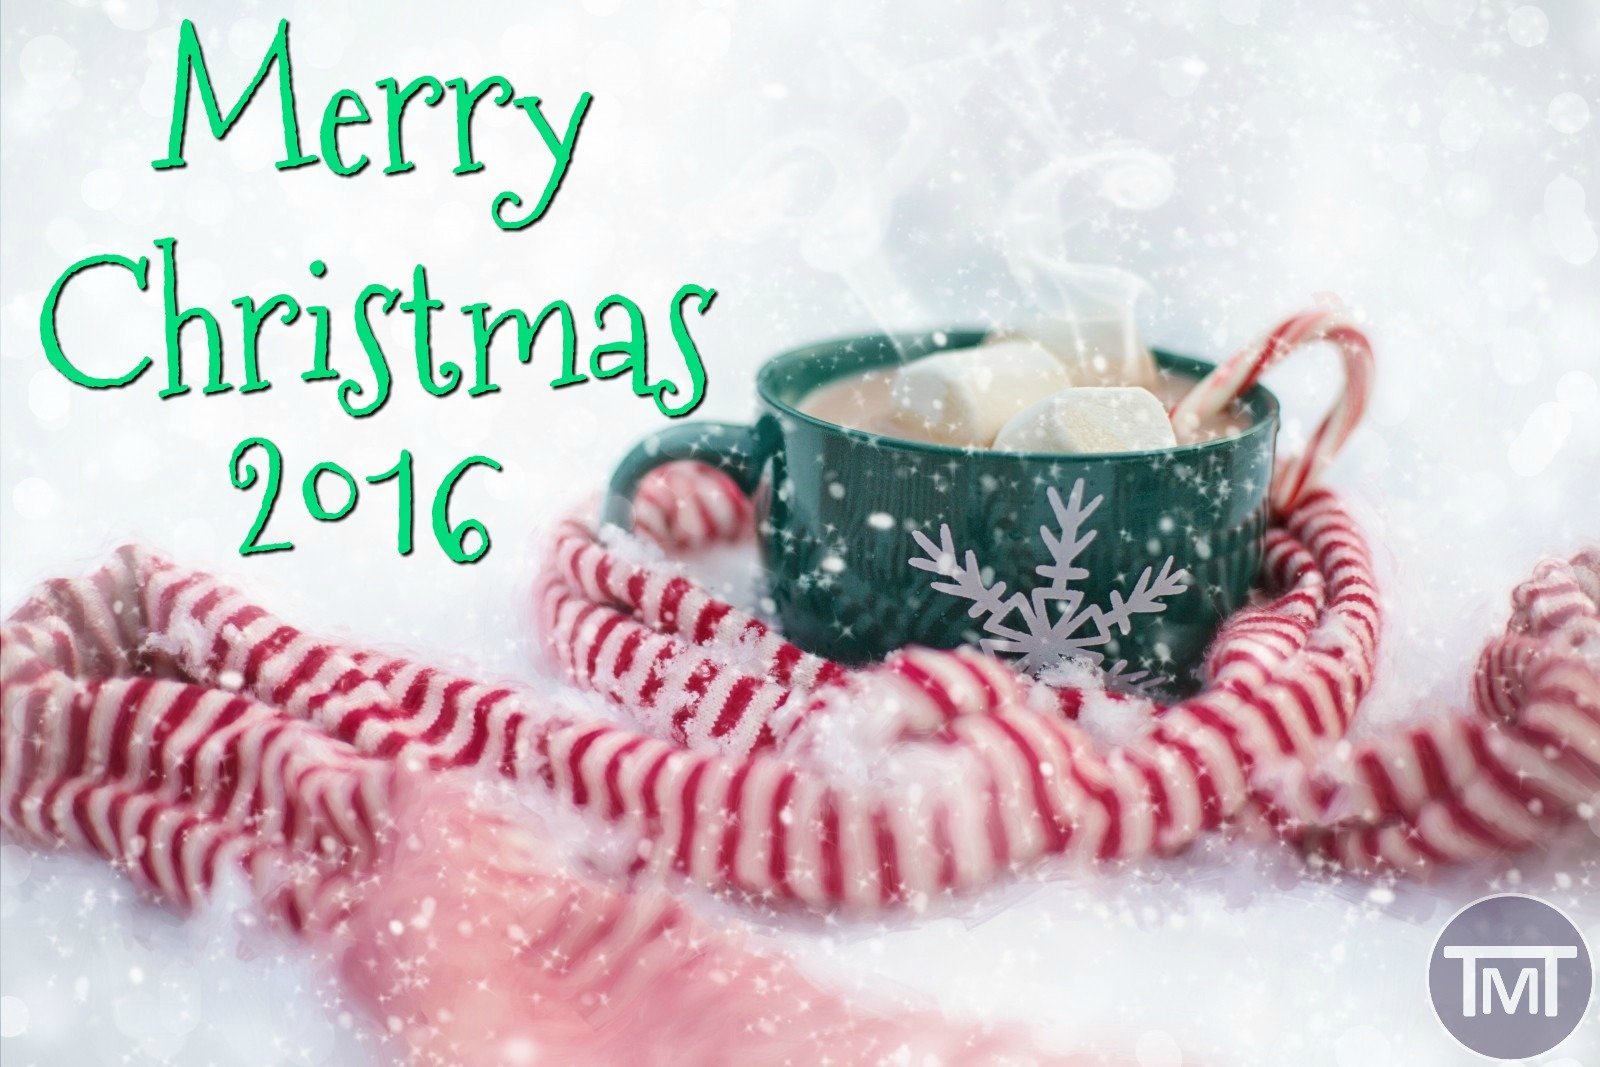 Merry Christmas 2016 feature image